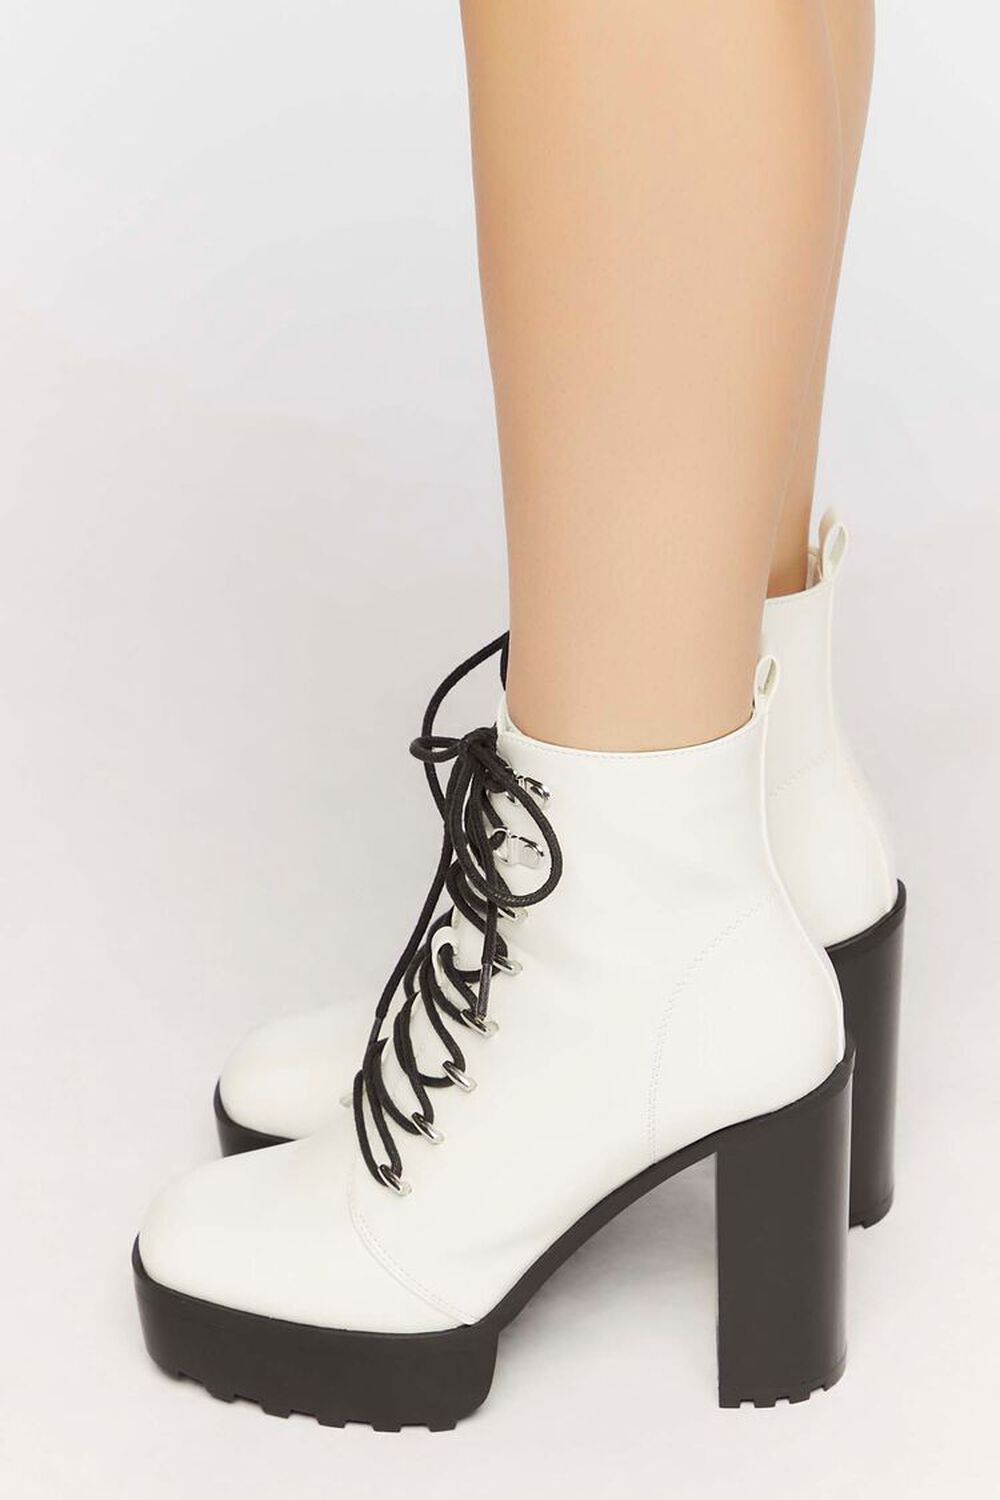 WHITE Faux Leather Lace-Up Booties, image 2